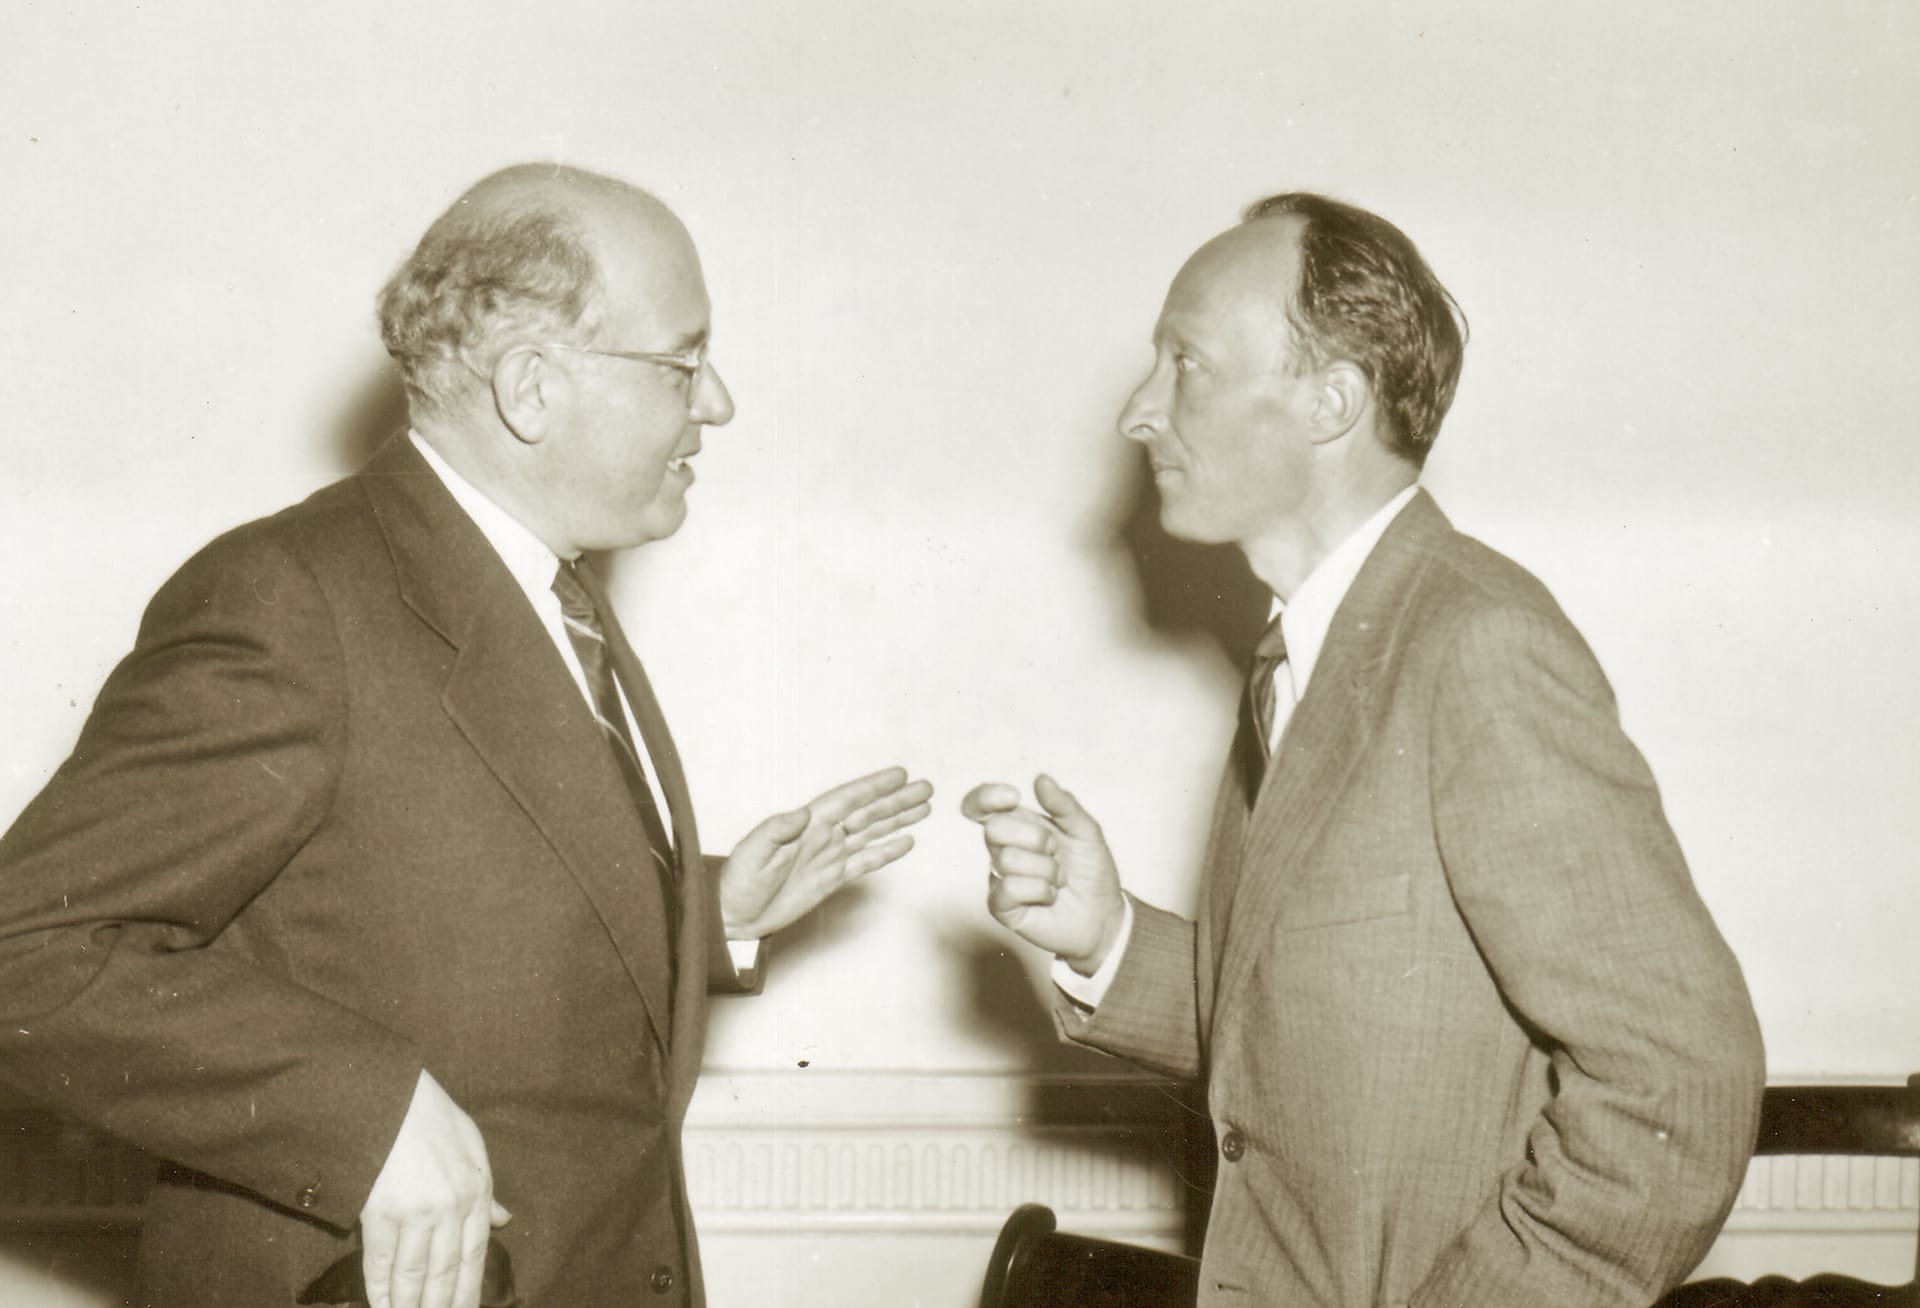 With the polish composer Witold Lutoslawski in Warsaw (1956)